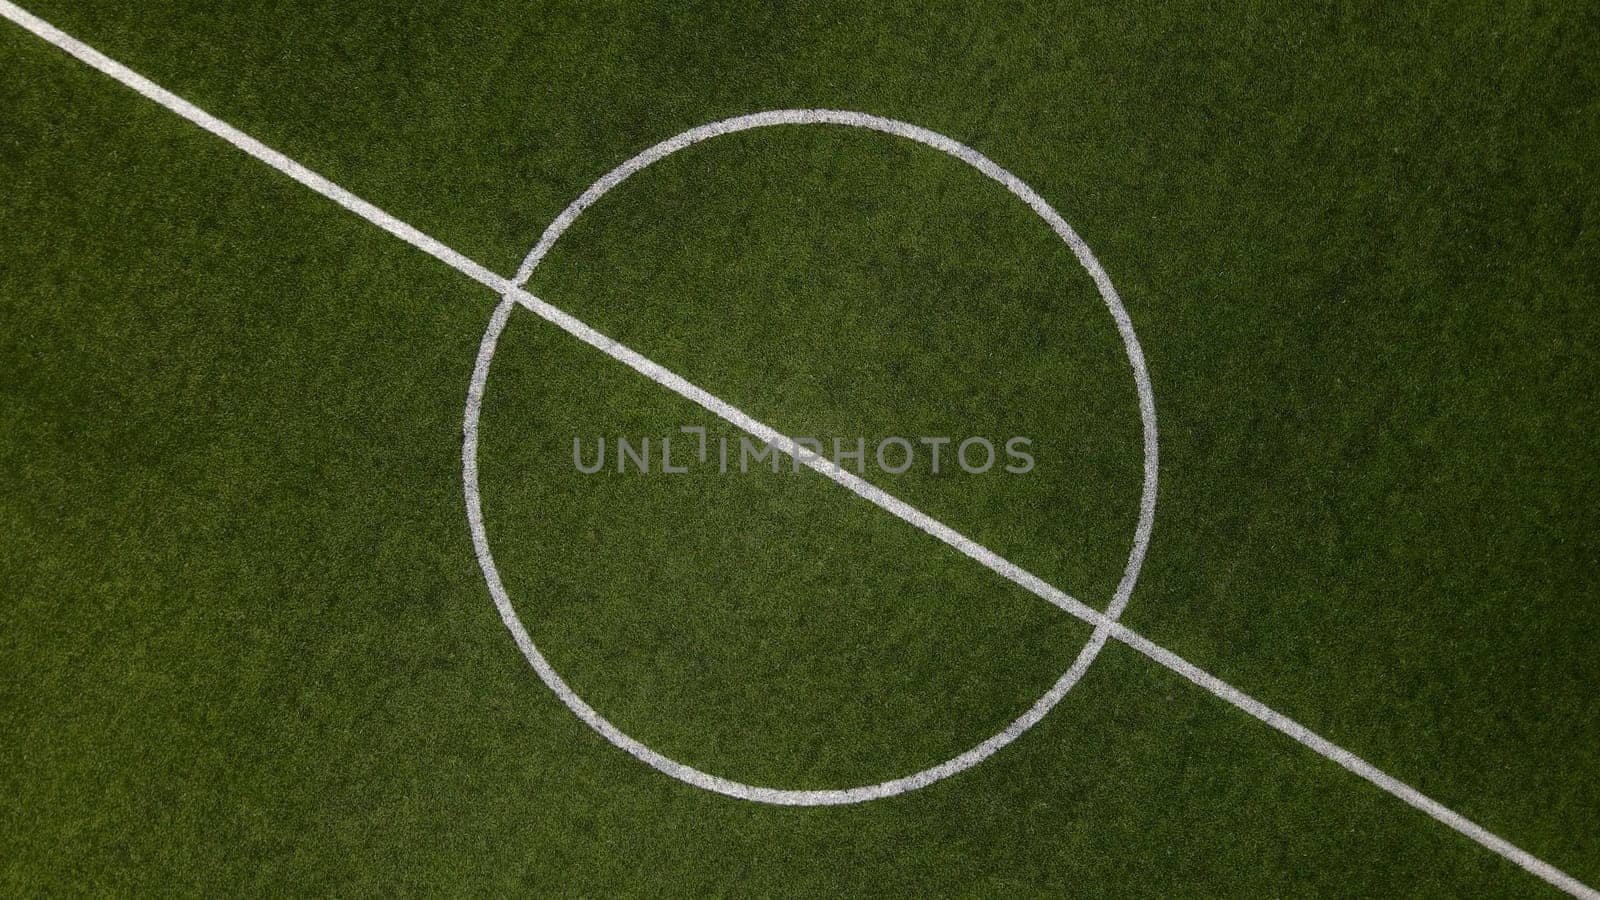 Aerial view of the center of a football field.